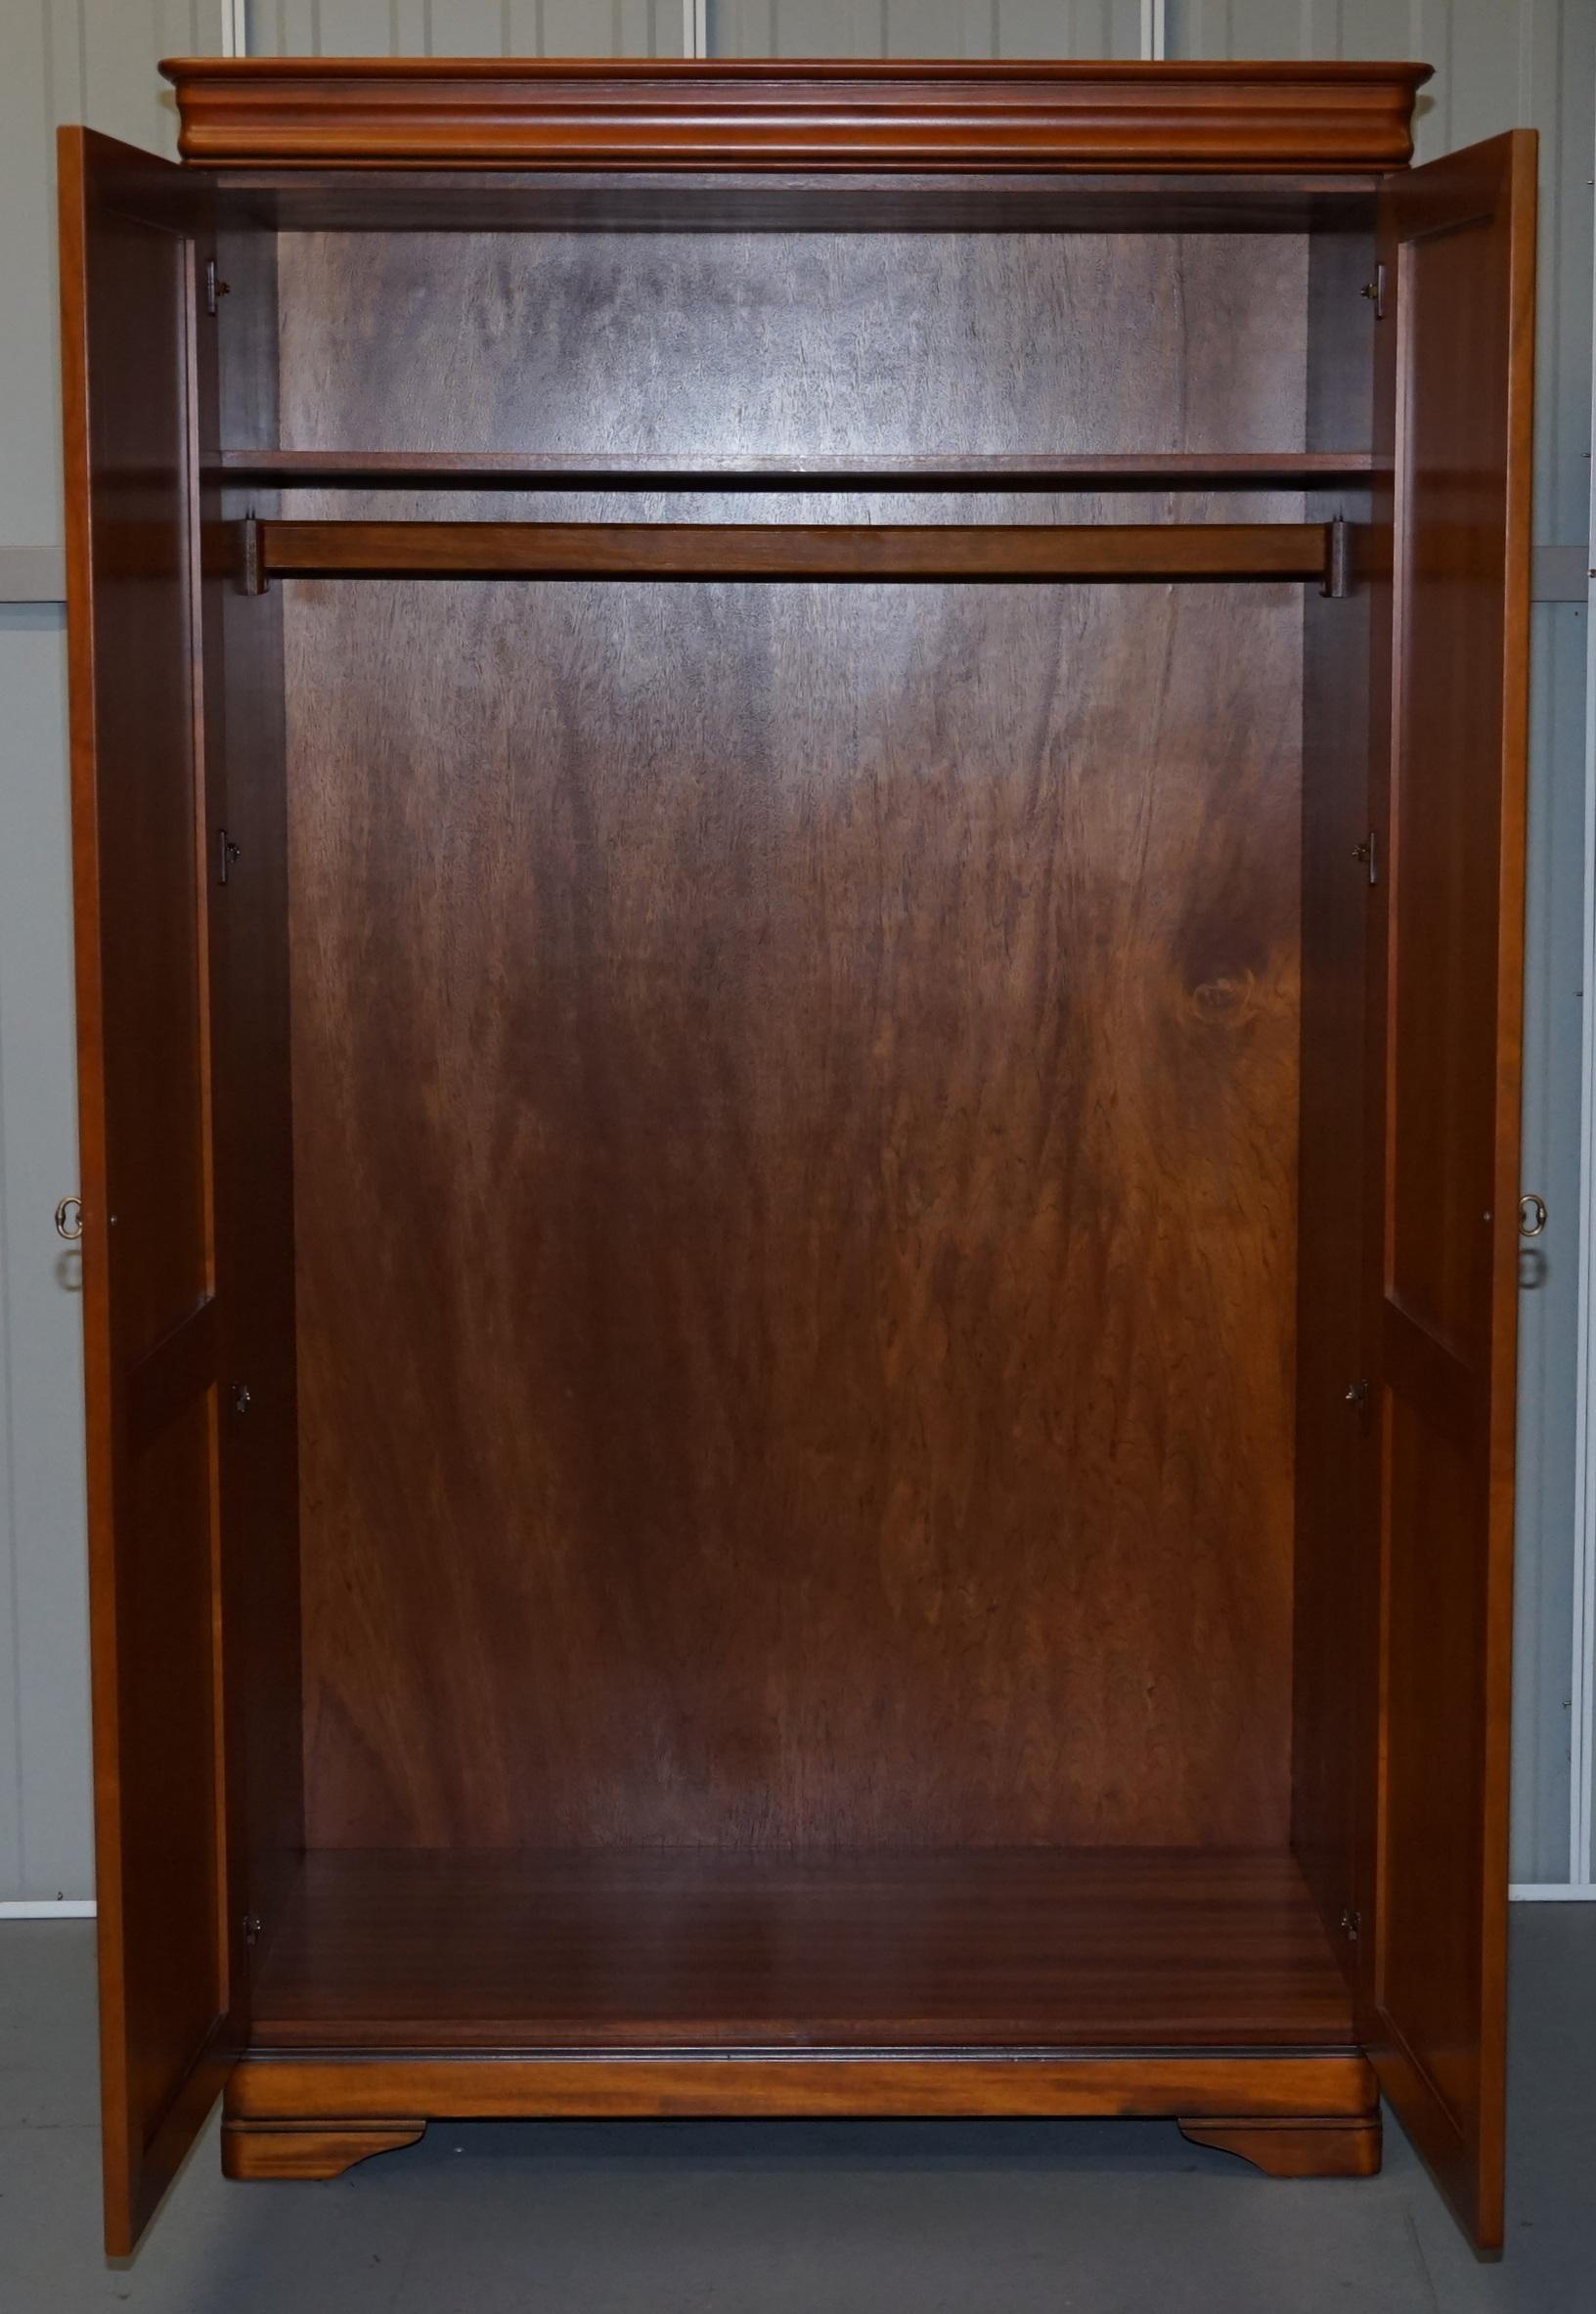 English Stunning Solid Cherry Wood Double Bank Wardrobe Part of a Large Suite Must See